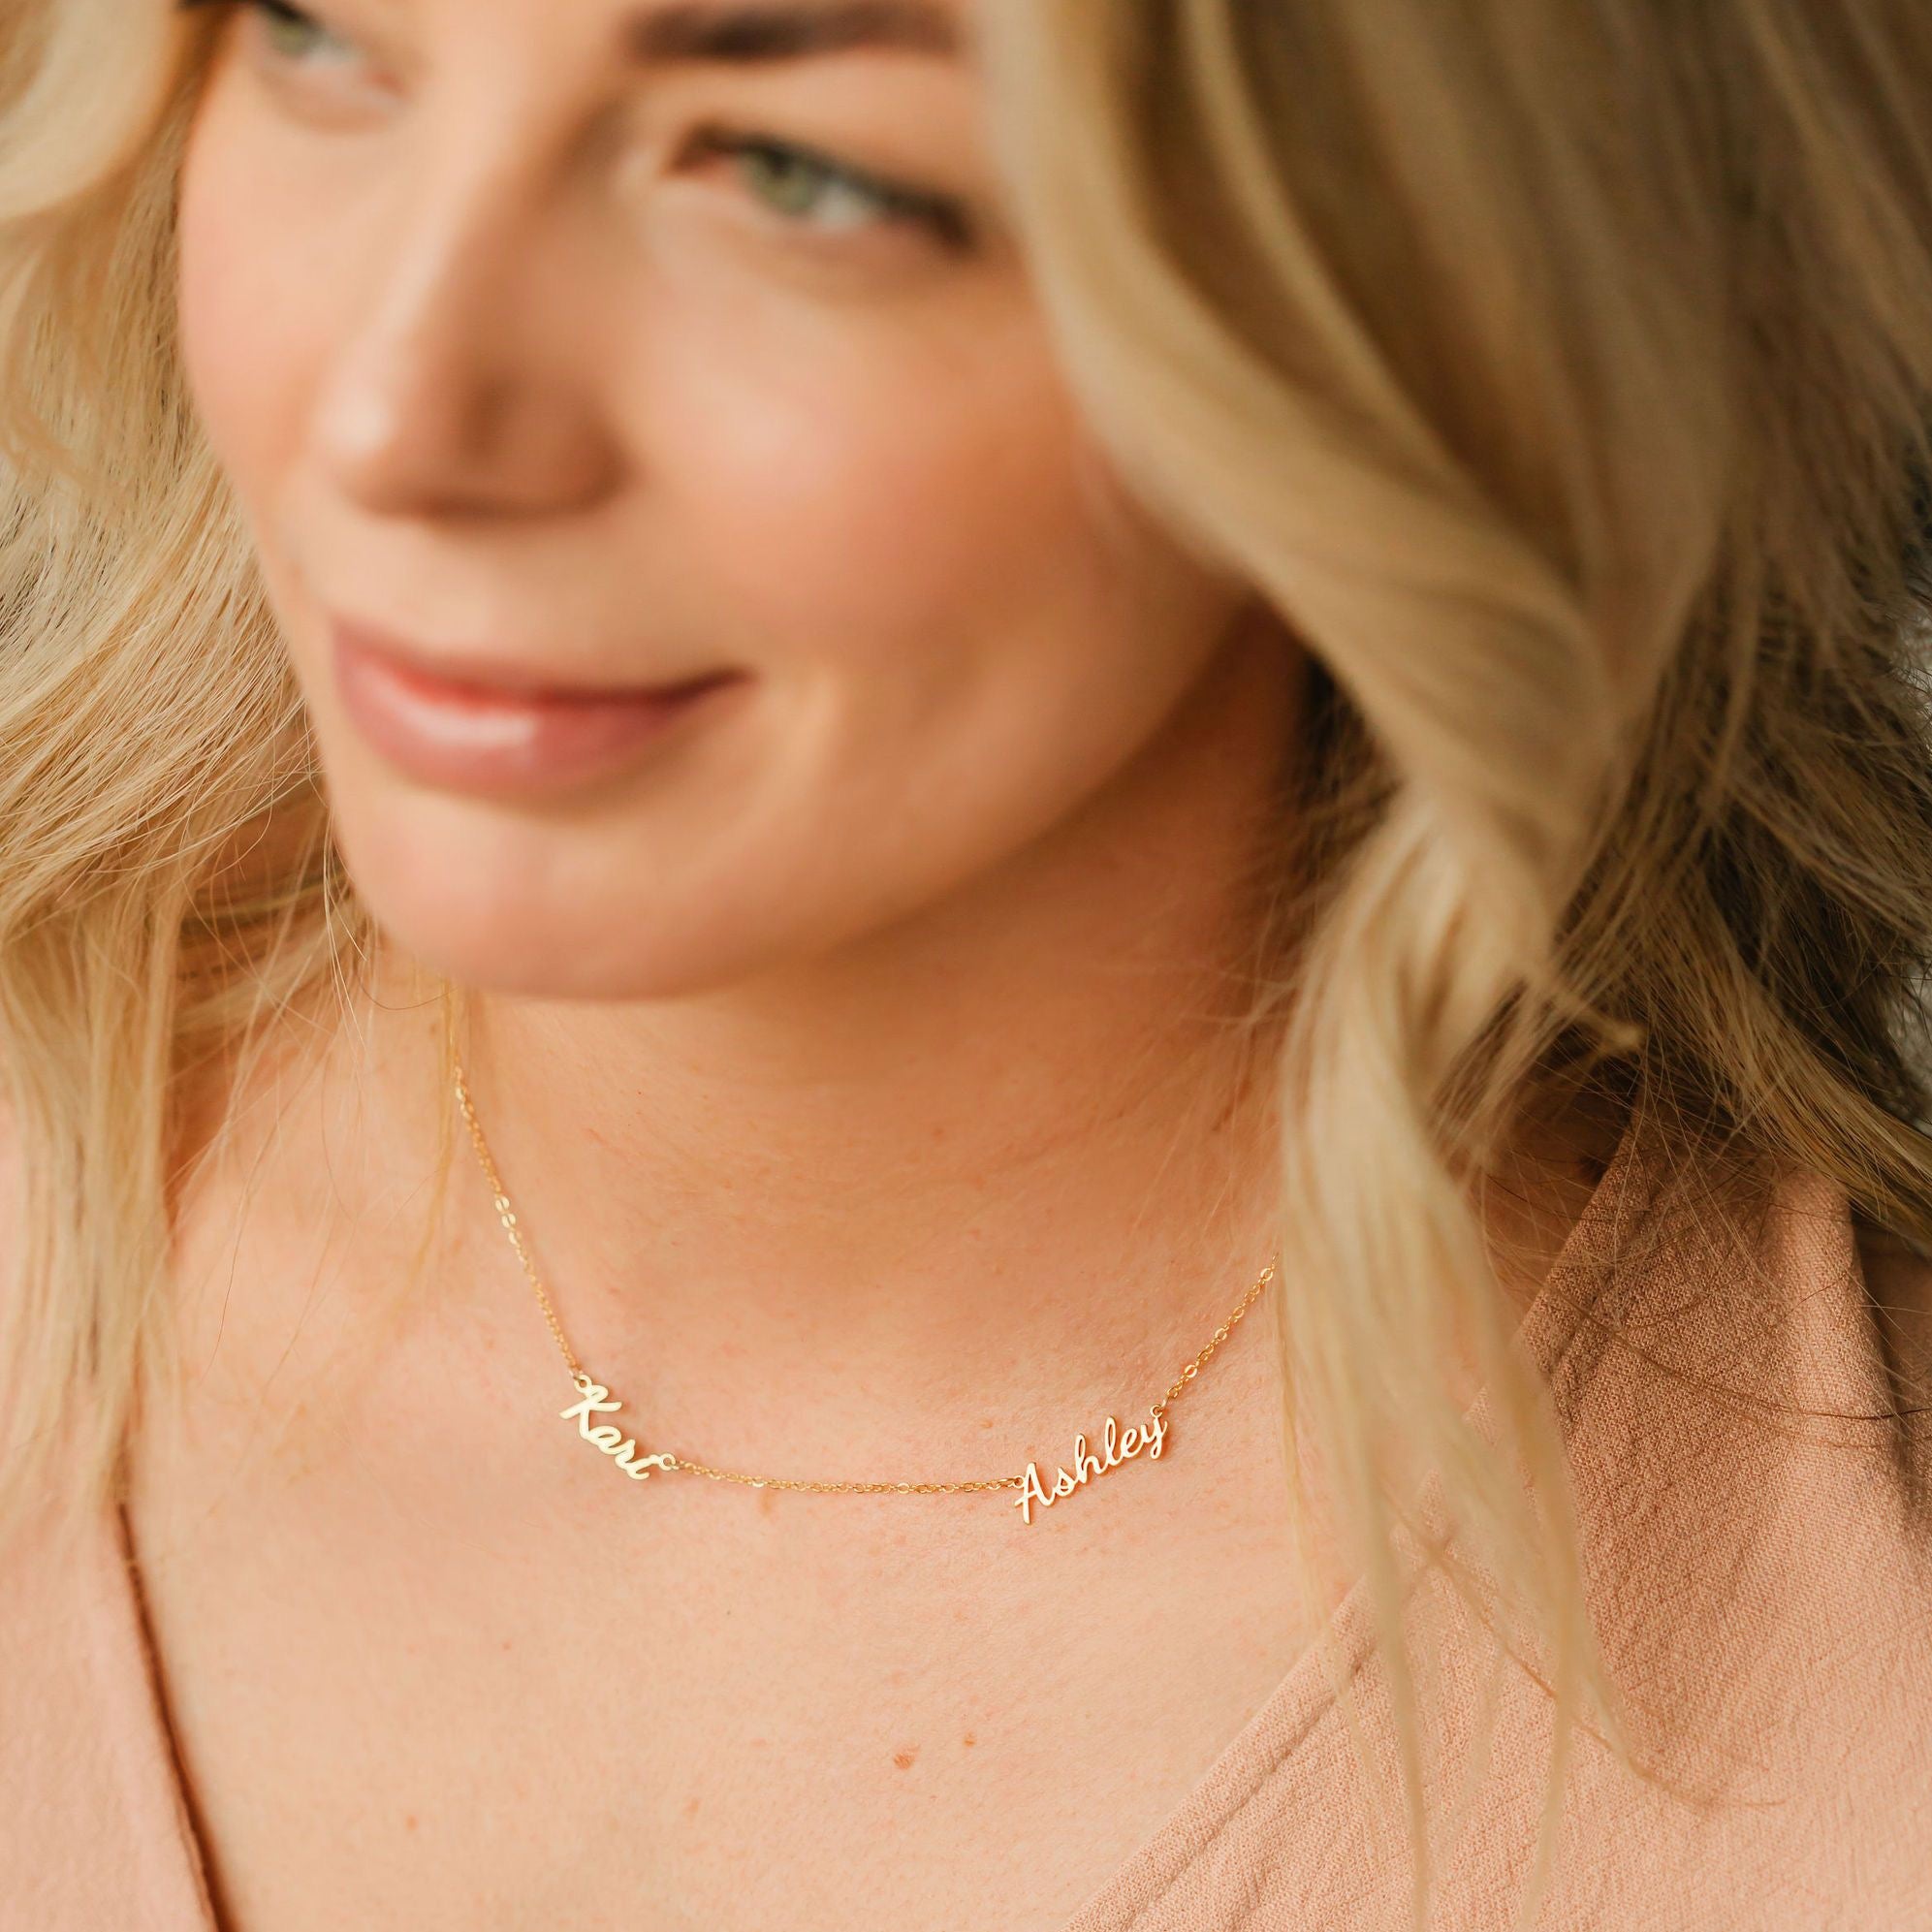 Model wearing multiple name necklace